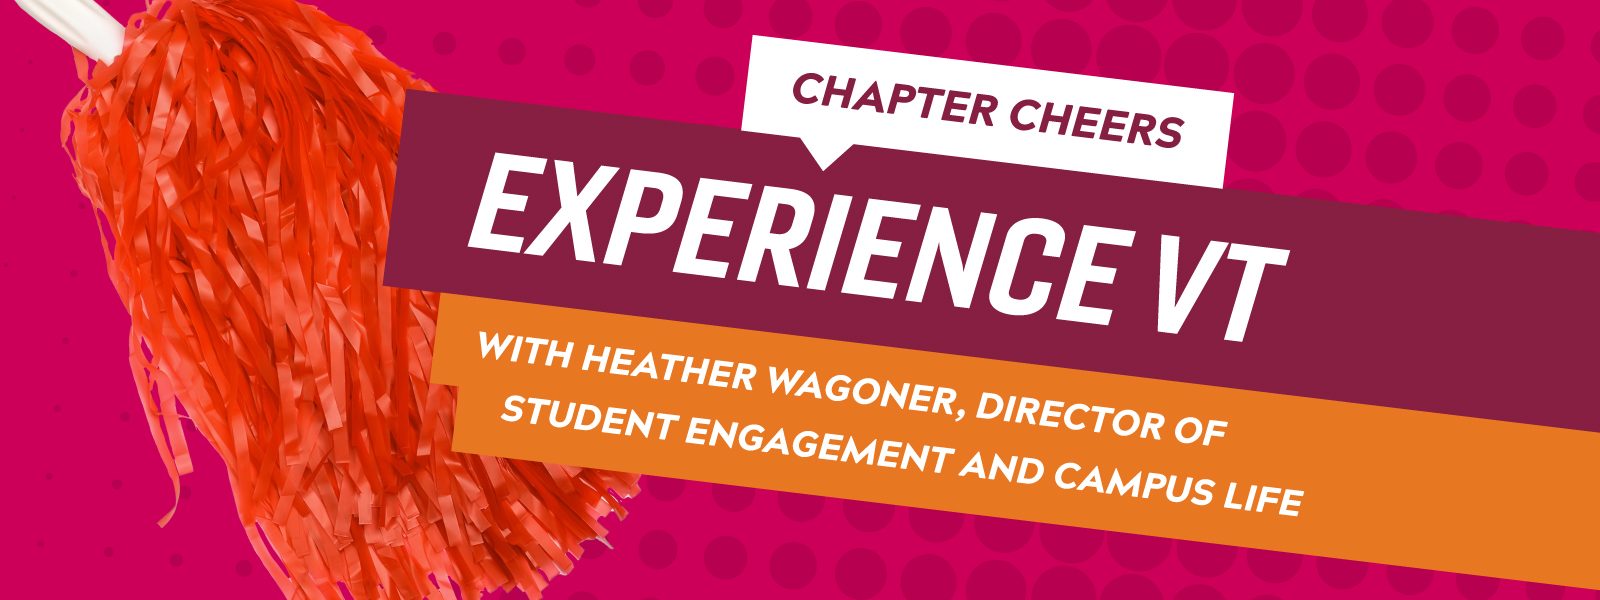 Chapter Cheers:  ExperienceVT